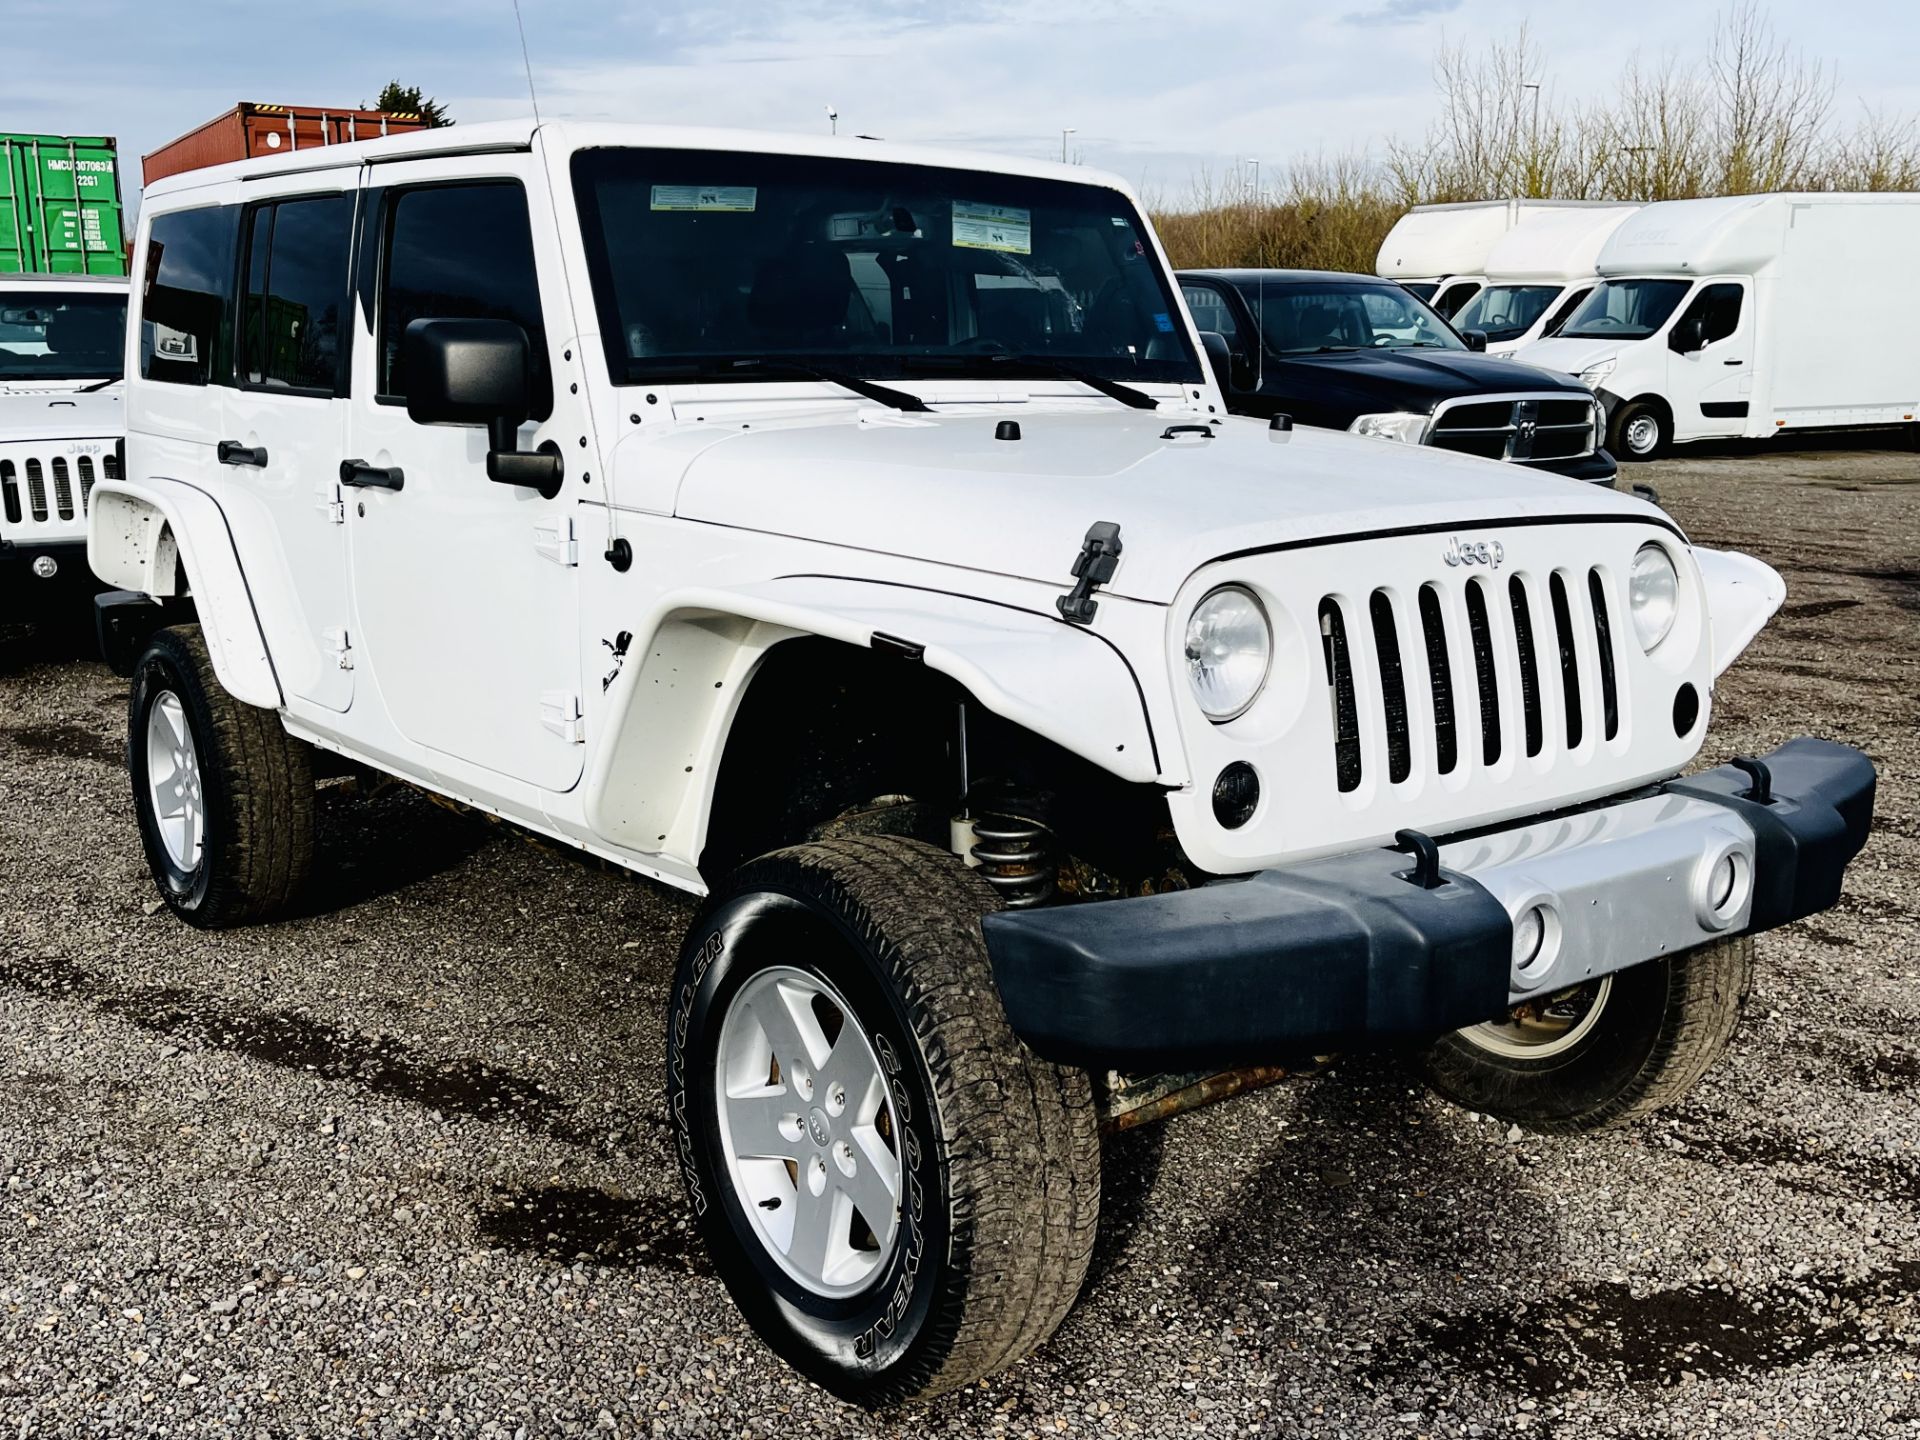 **ON SALE ** Jeep Wrangler 3.6L V6 Unlimited Sahara 4WD Convertible HardTop '2014 Year' - A/C